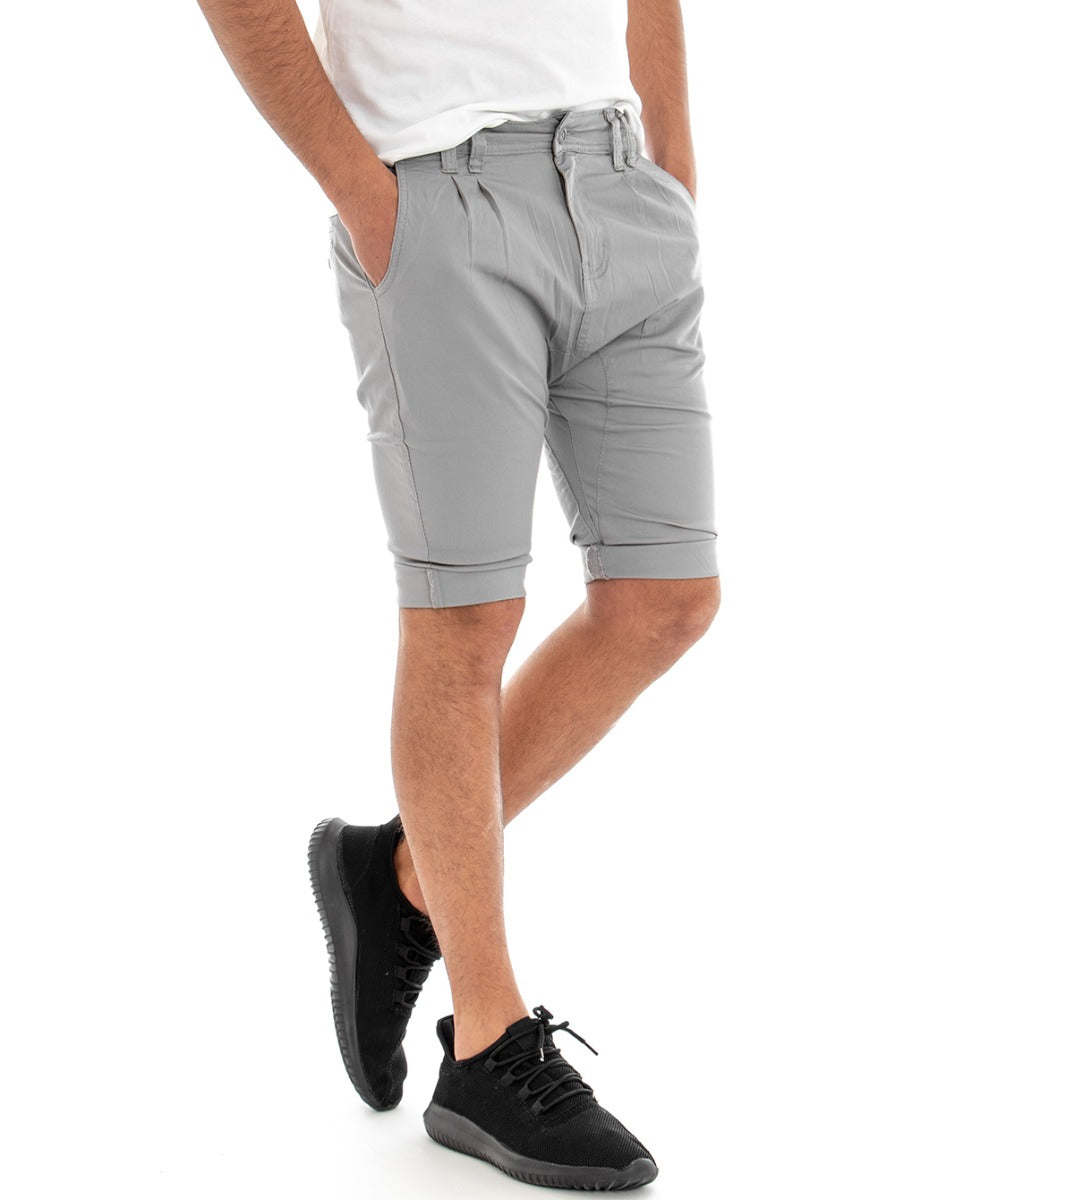 Bermuda Men's Short Shorts Gray Pence Solid Color Low Crotch GIOSAL-PC1306A